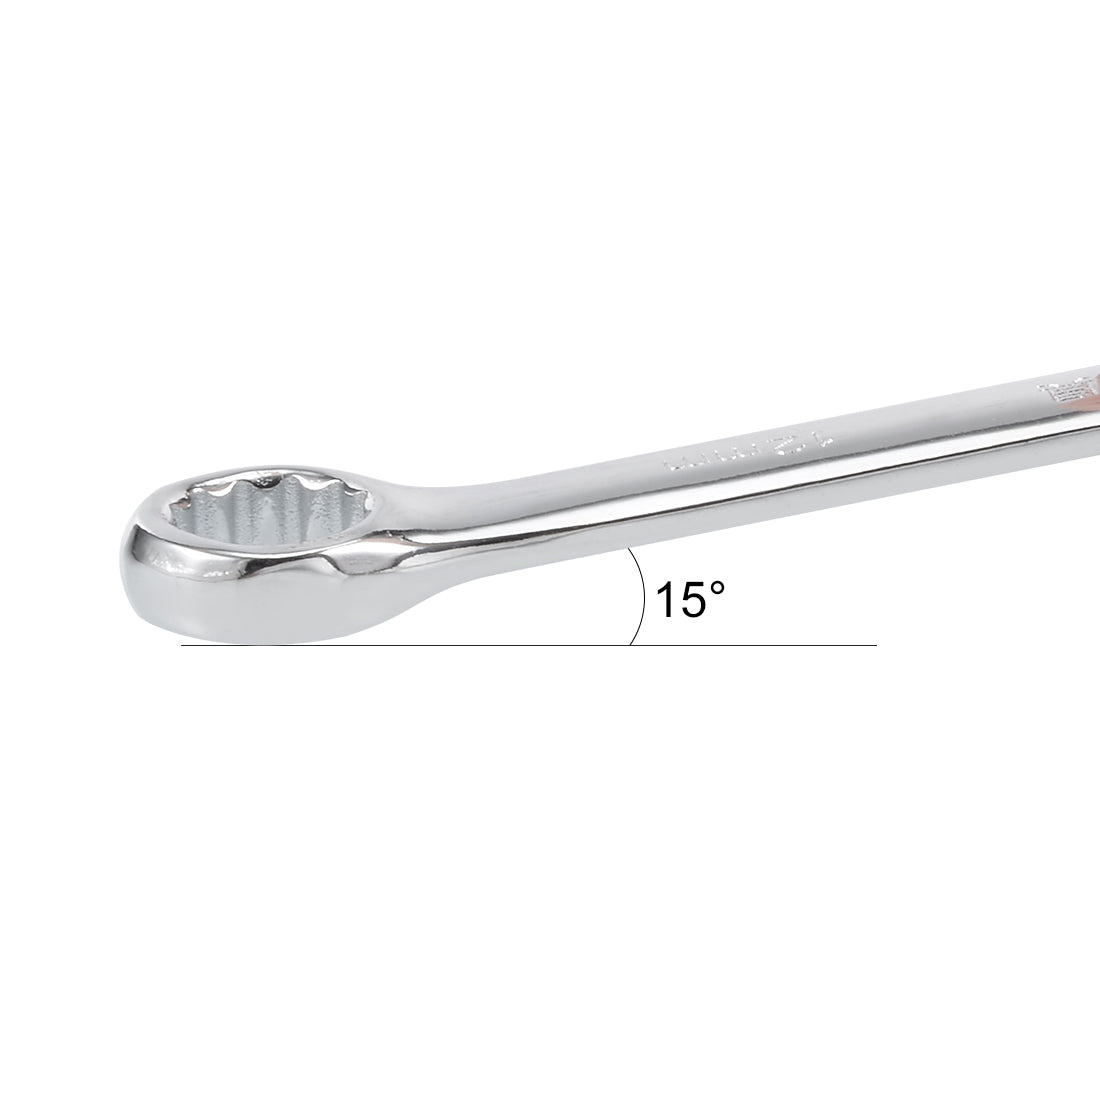 uxcell Uxcell Metric 12mm 12-Point Box Open End Combination Wrench Chrome Finish, Cr-V